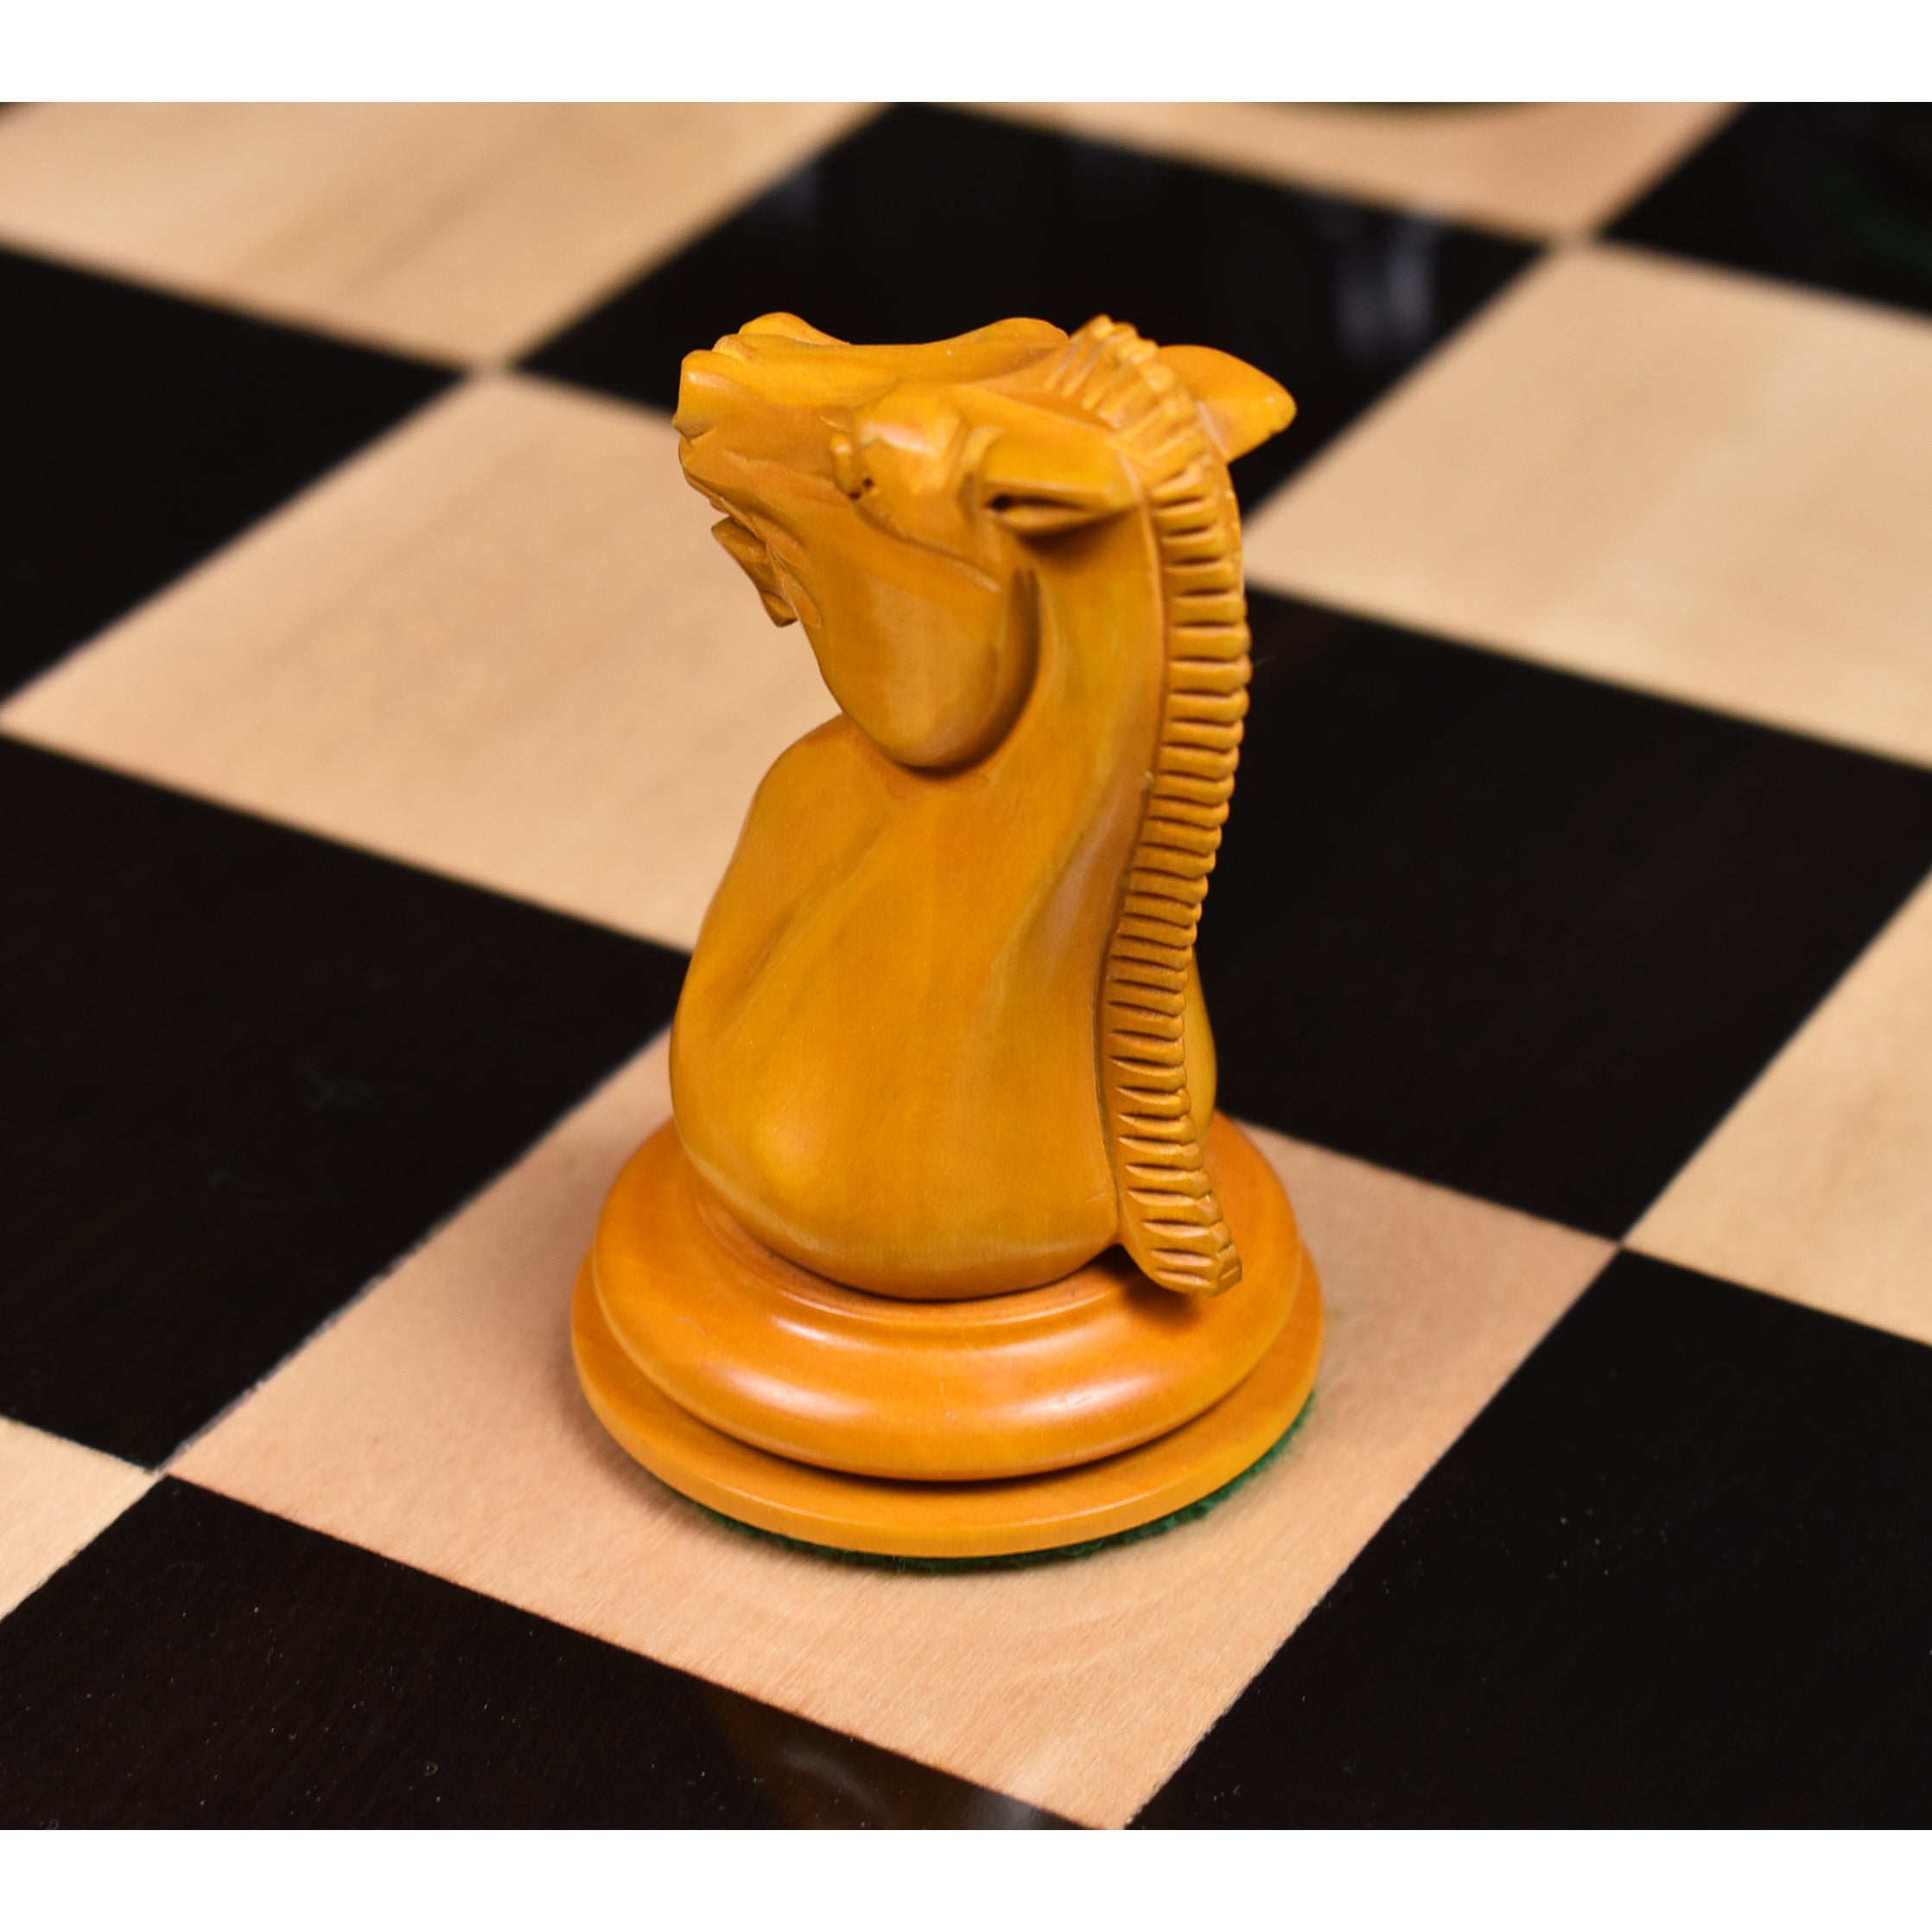 Luxury Ebony & Maple Chess Pieces with Wooden Chess Box and Flat Chess Board  - Henry Chess Sets